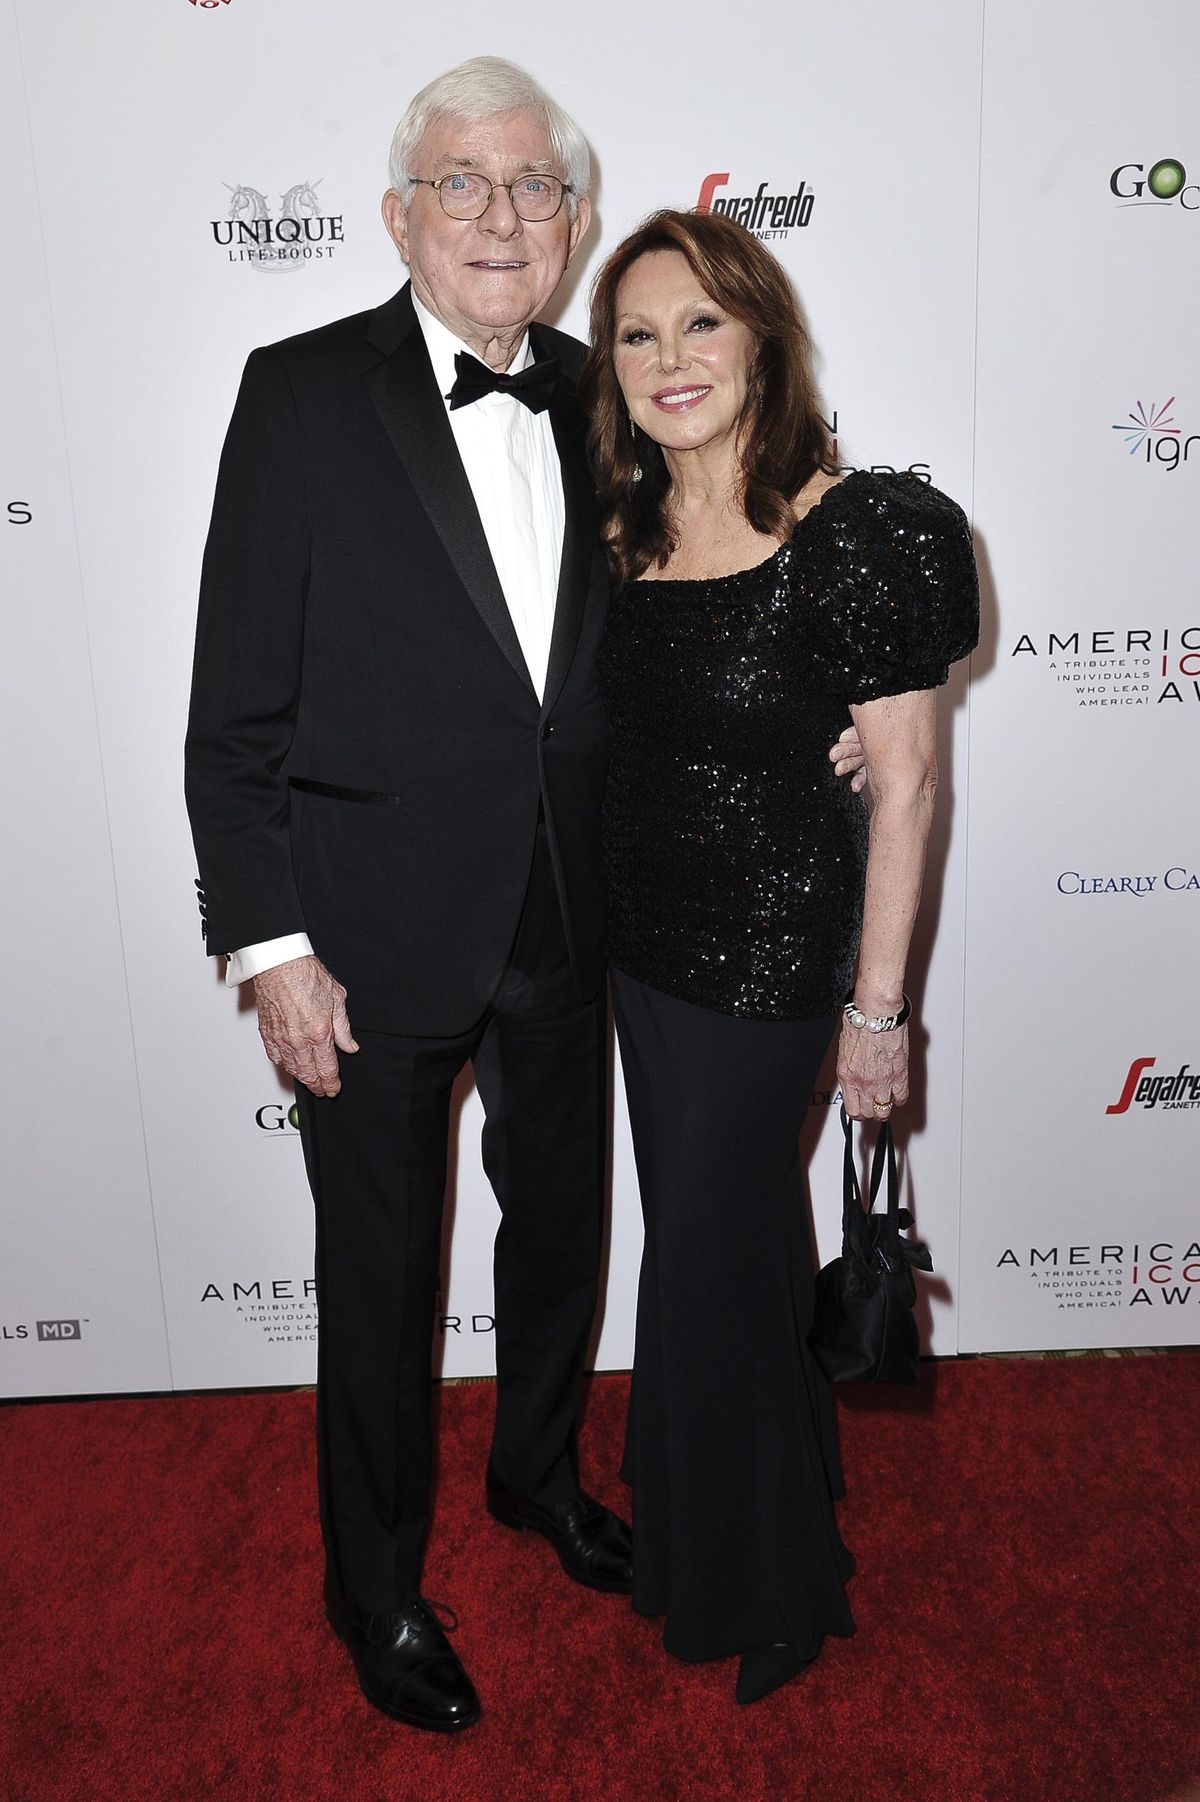 Phil Donahue and Marlo Thomas attend the 2019 American Icon Awards at the Beverly Wilshire Hotel on May 19, 2019, in Beverly Hills, California. (Richard Shotwell / Invision/AP)